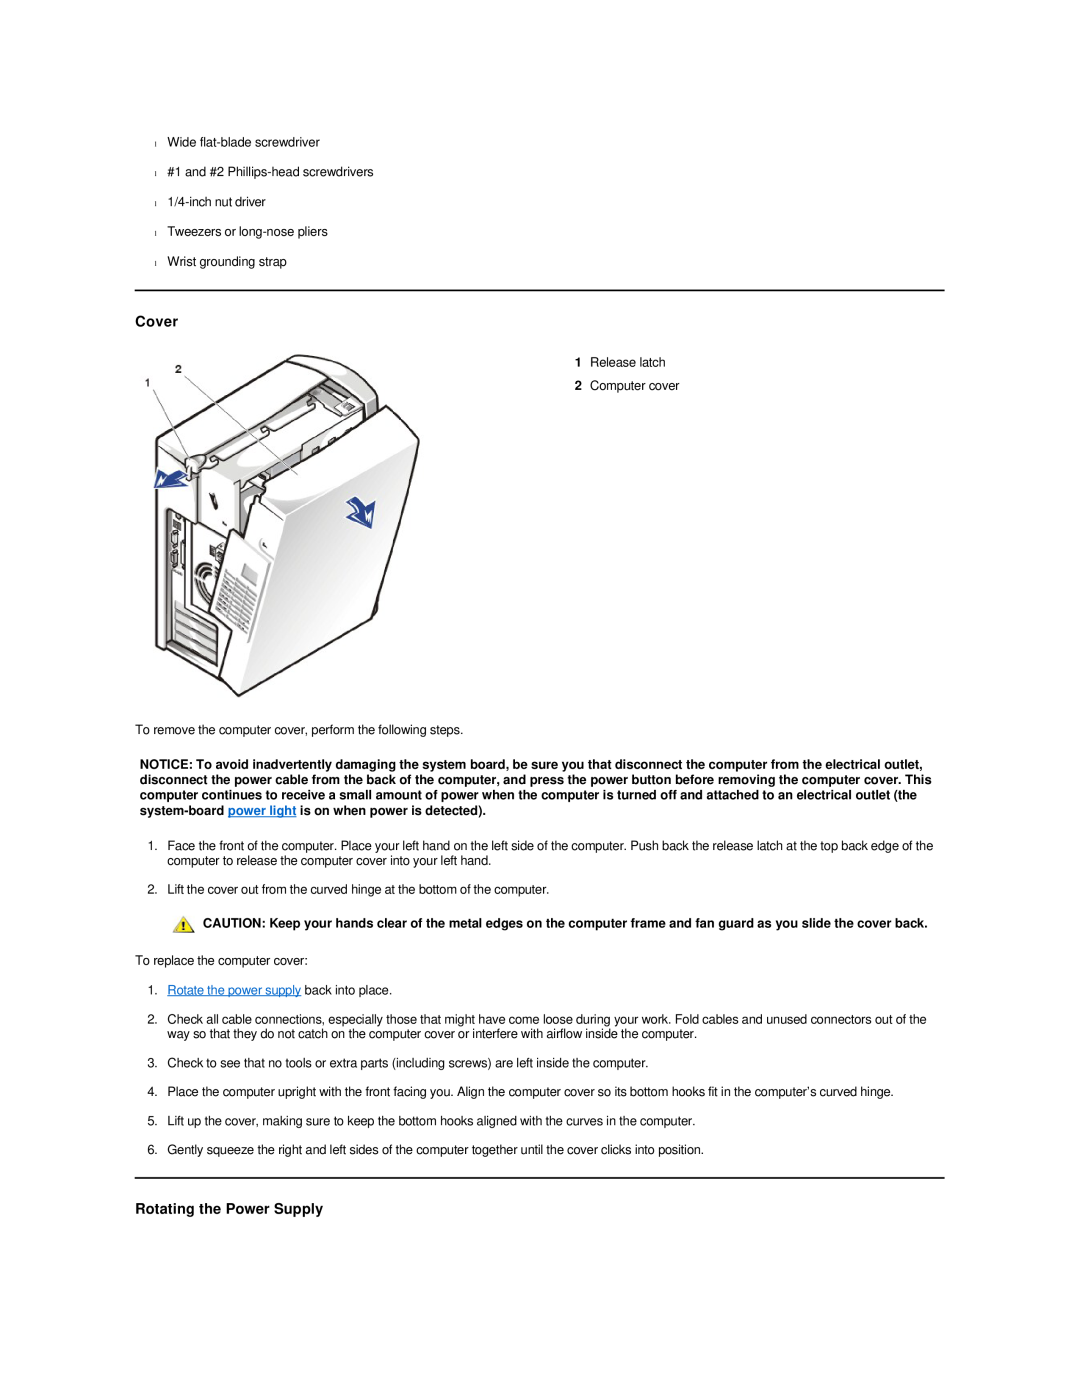 Dell Dimension 2100 technical specifications Cover, Rotating the Power Supply, Rotate the power supply back into place 